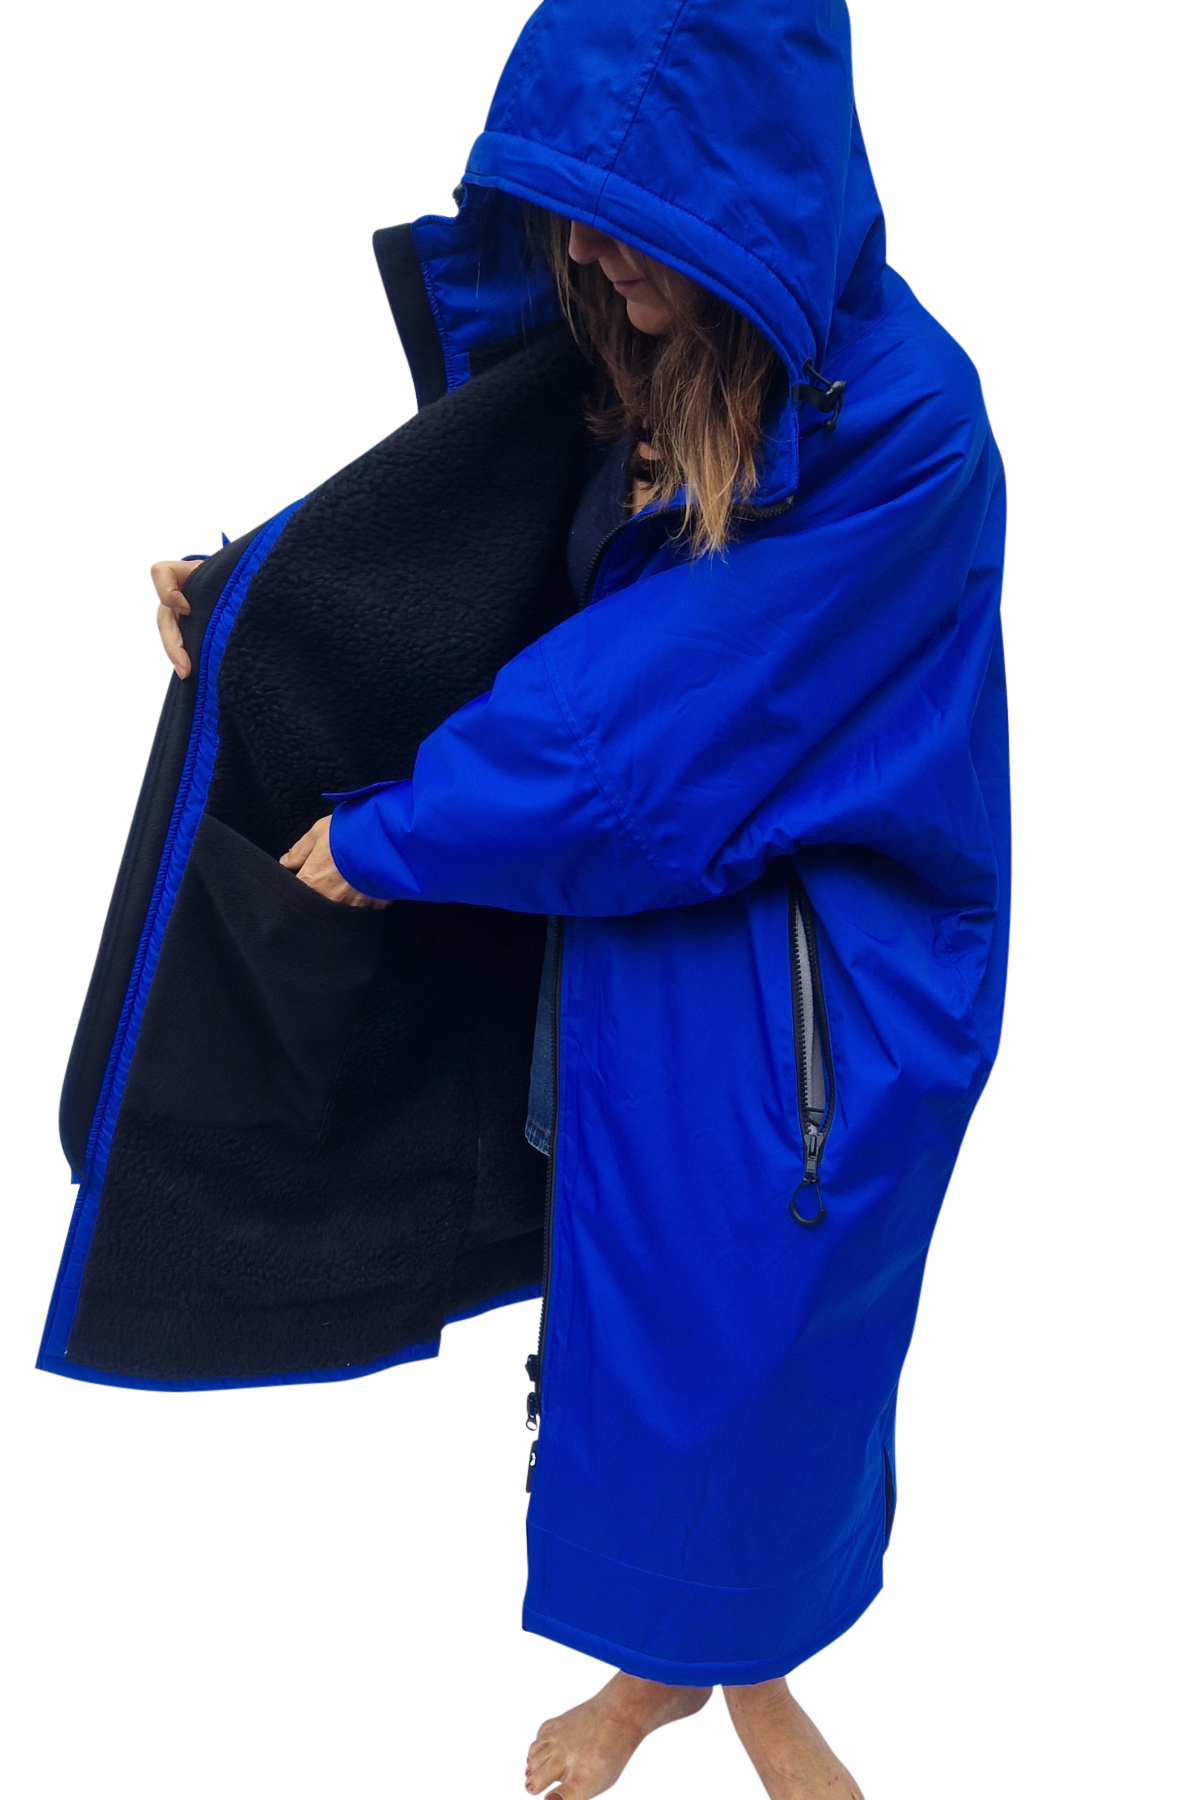 Sapphire Moose Eco - long sleeve changing robe -  electric blue/black